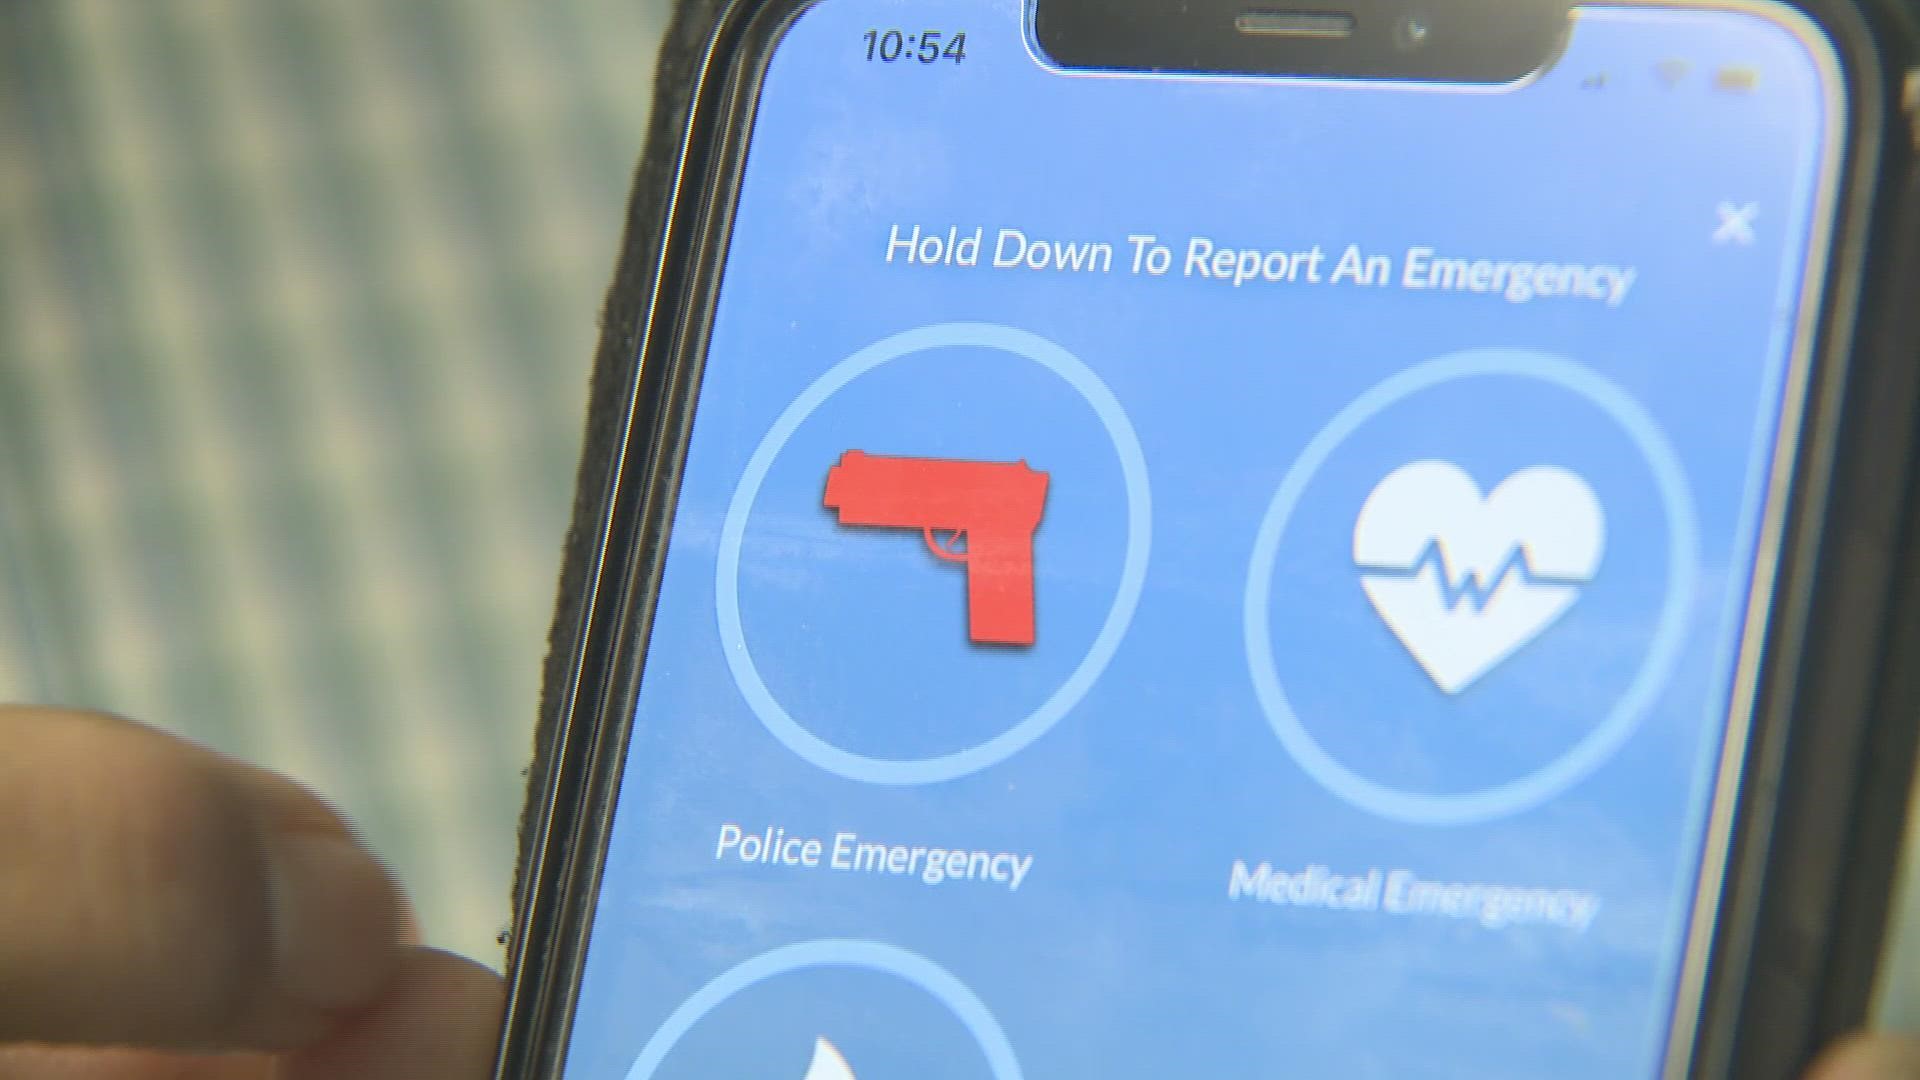 Saint Mary School in Milford is using SaferWatch, an app that connects directly with Milford police in case of an emergency